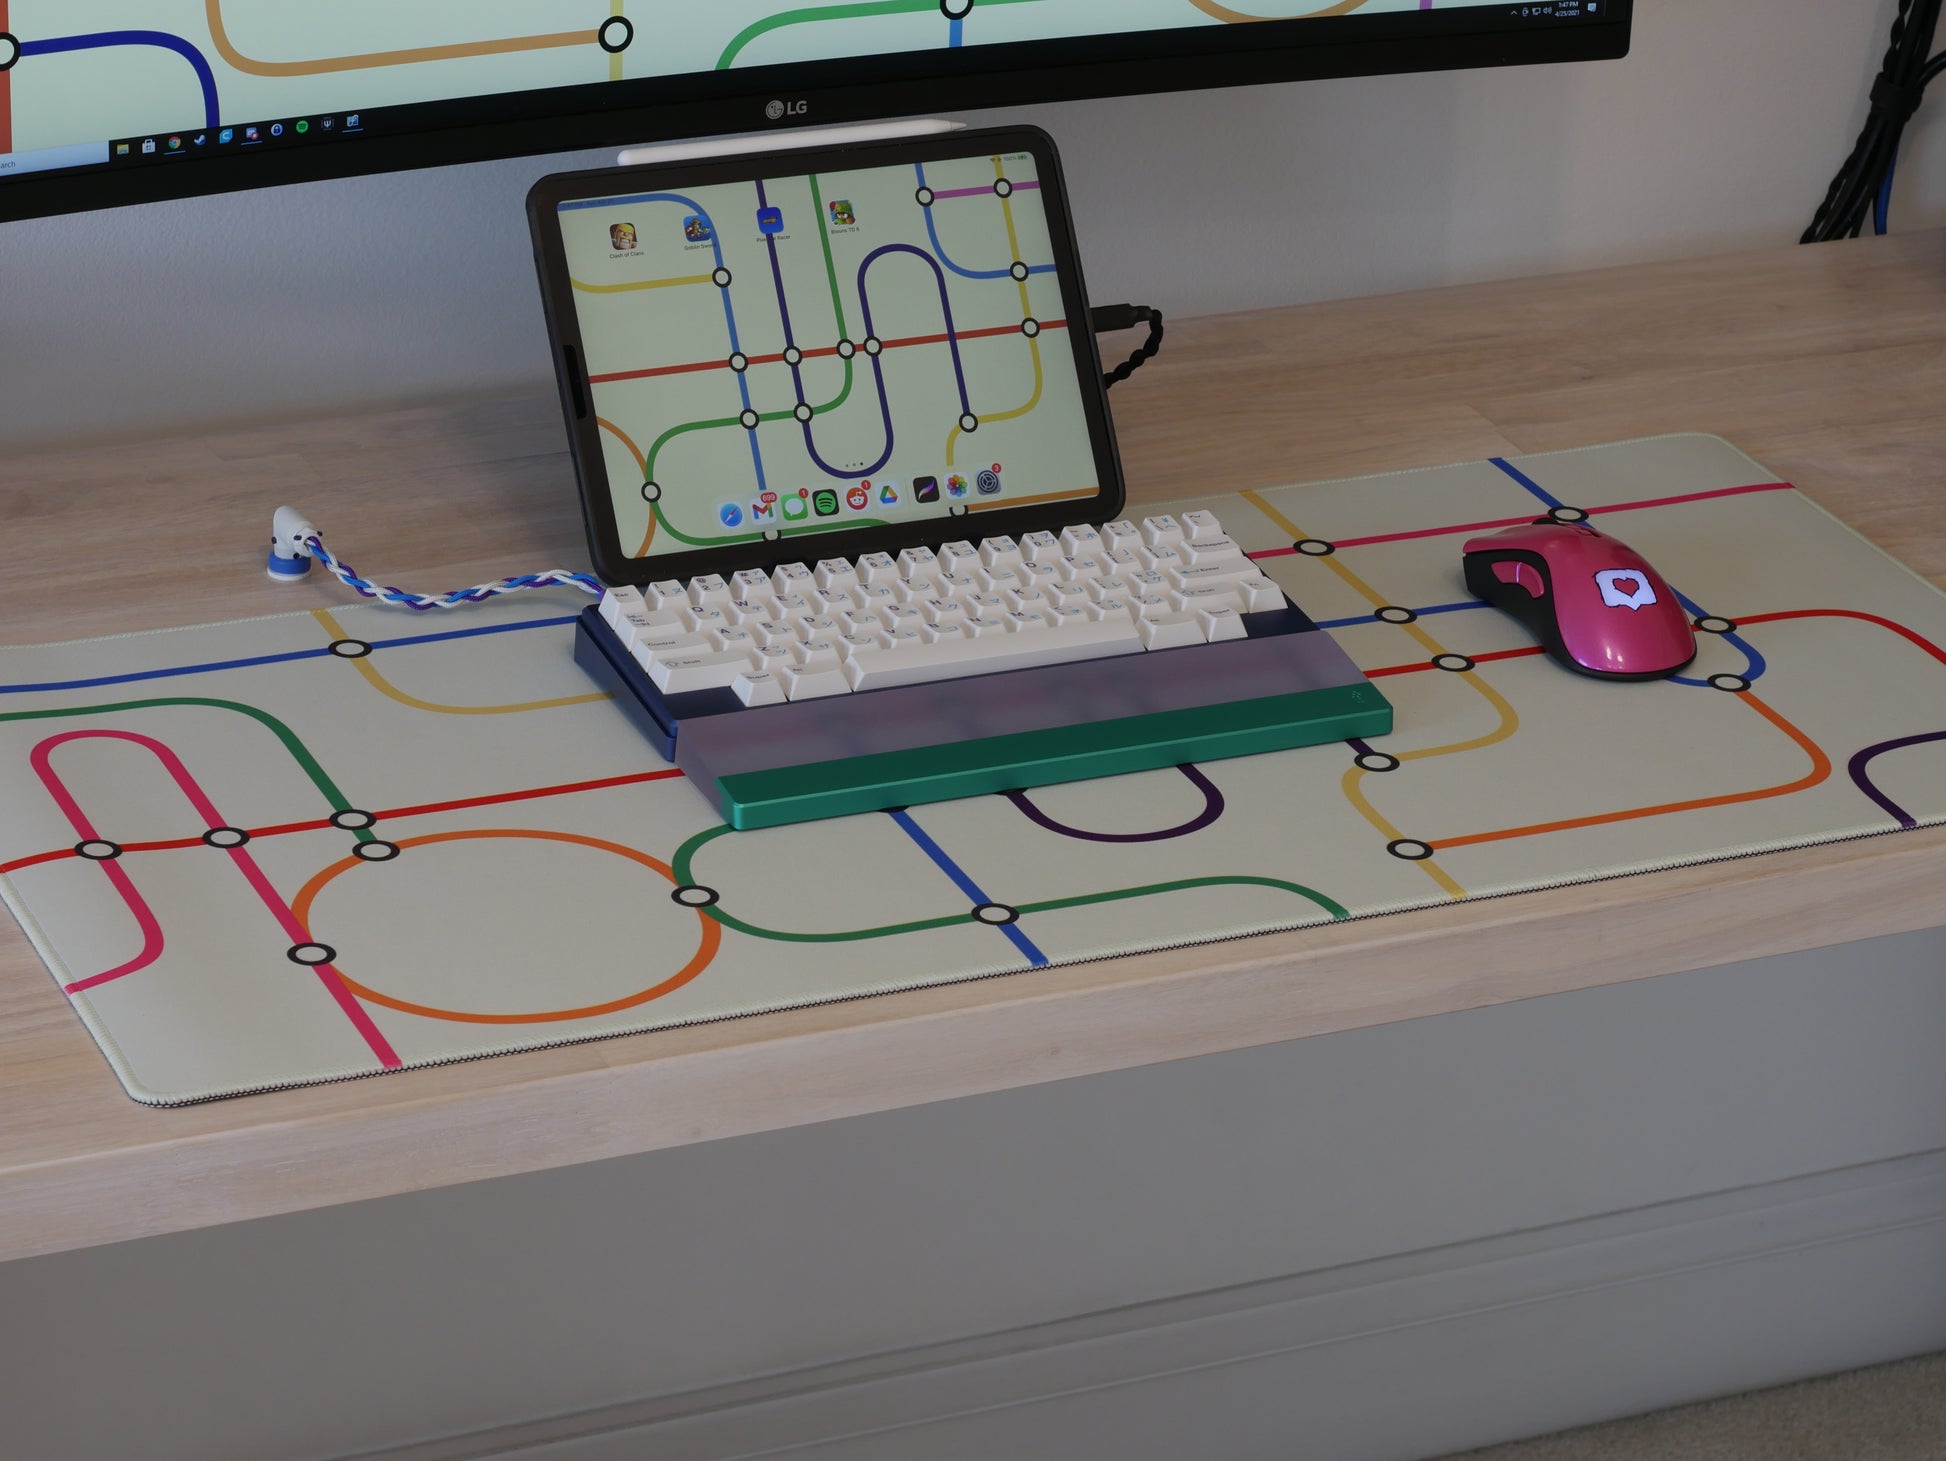 The subway transit desk mat with a white background and colorful lines sitting on a wooden desk. A keyboard, wrist rest, and mouse sit on the desk mat.